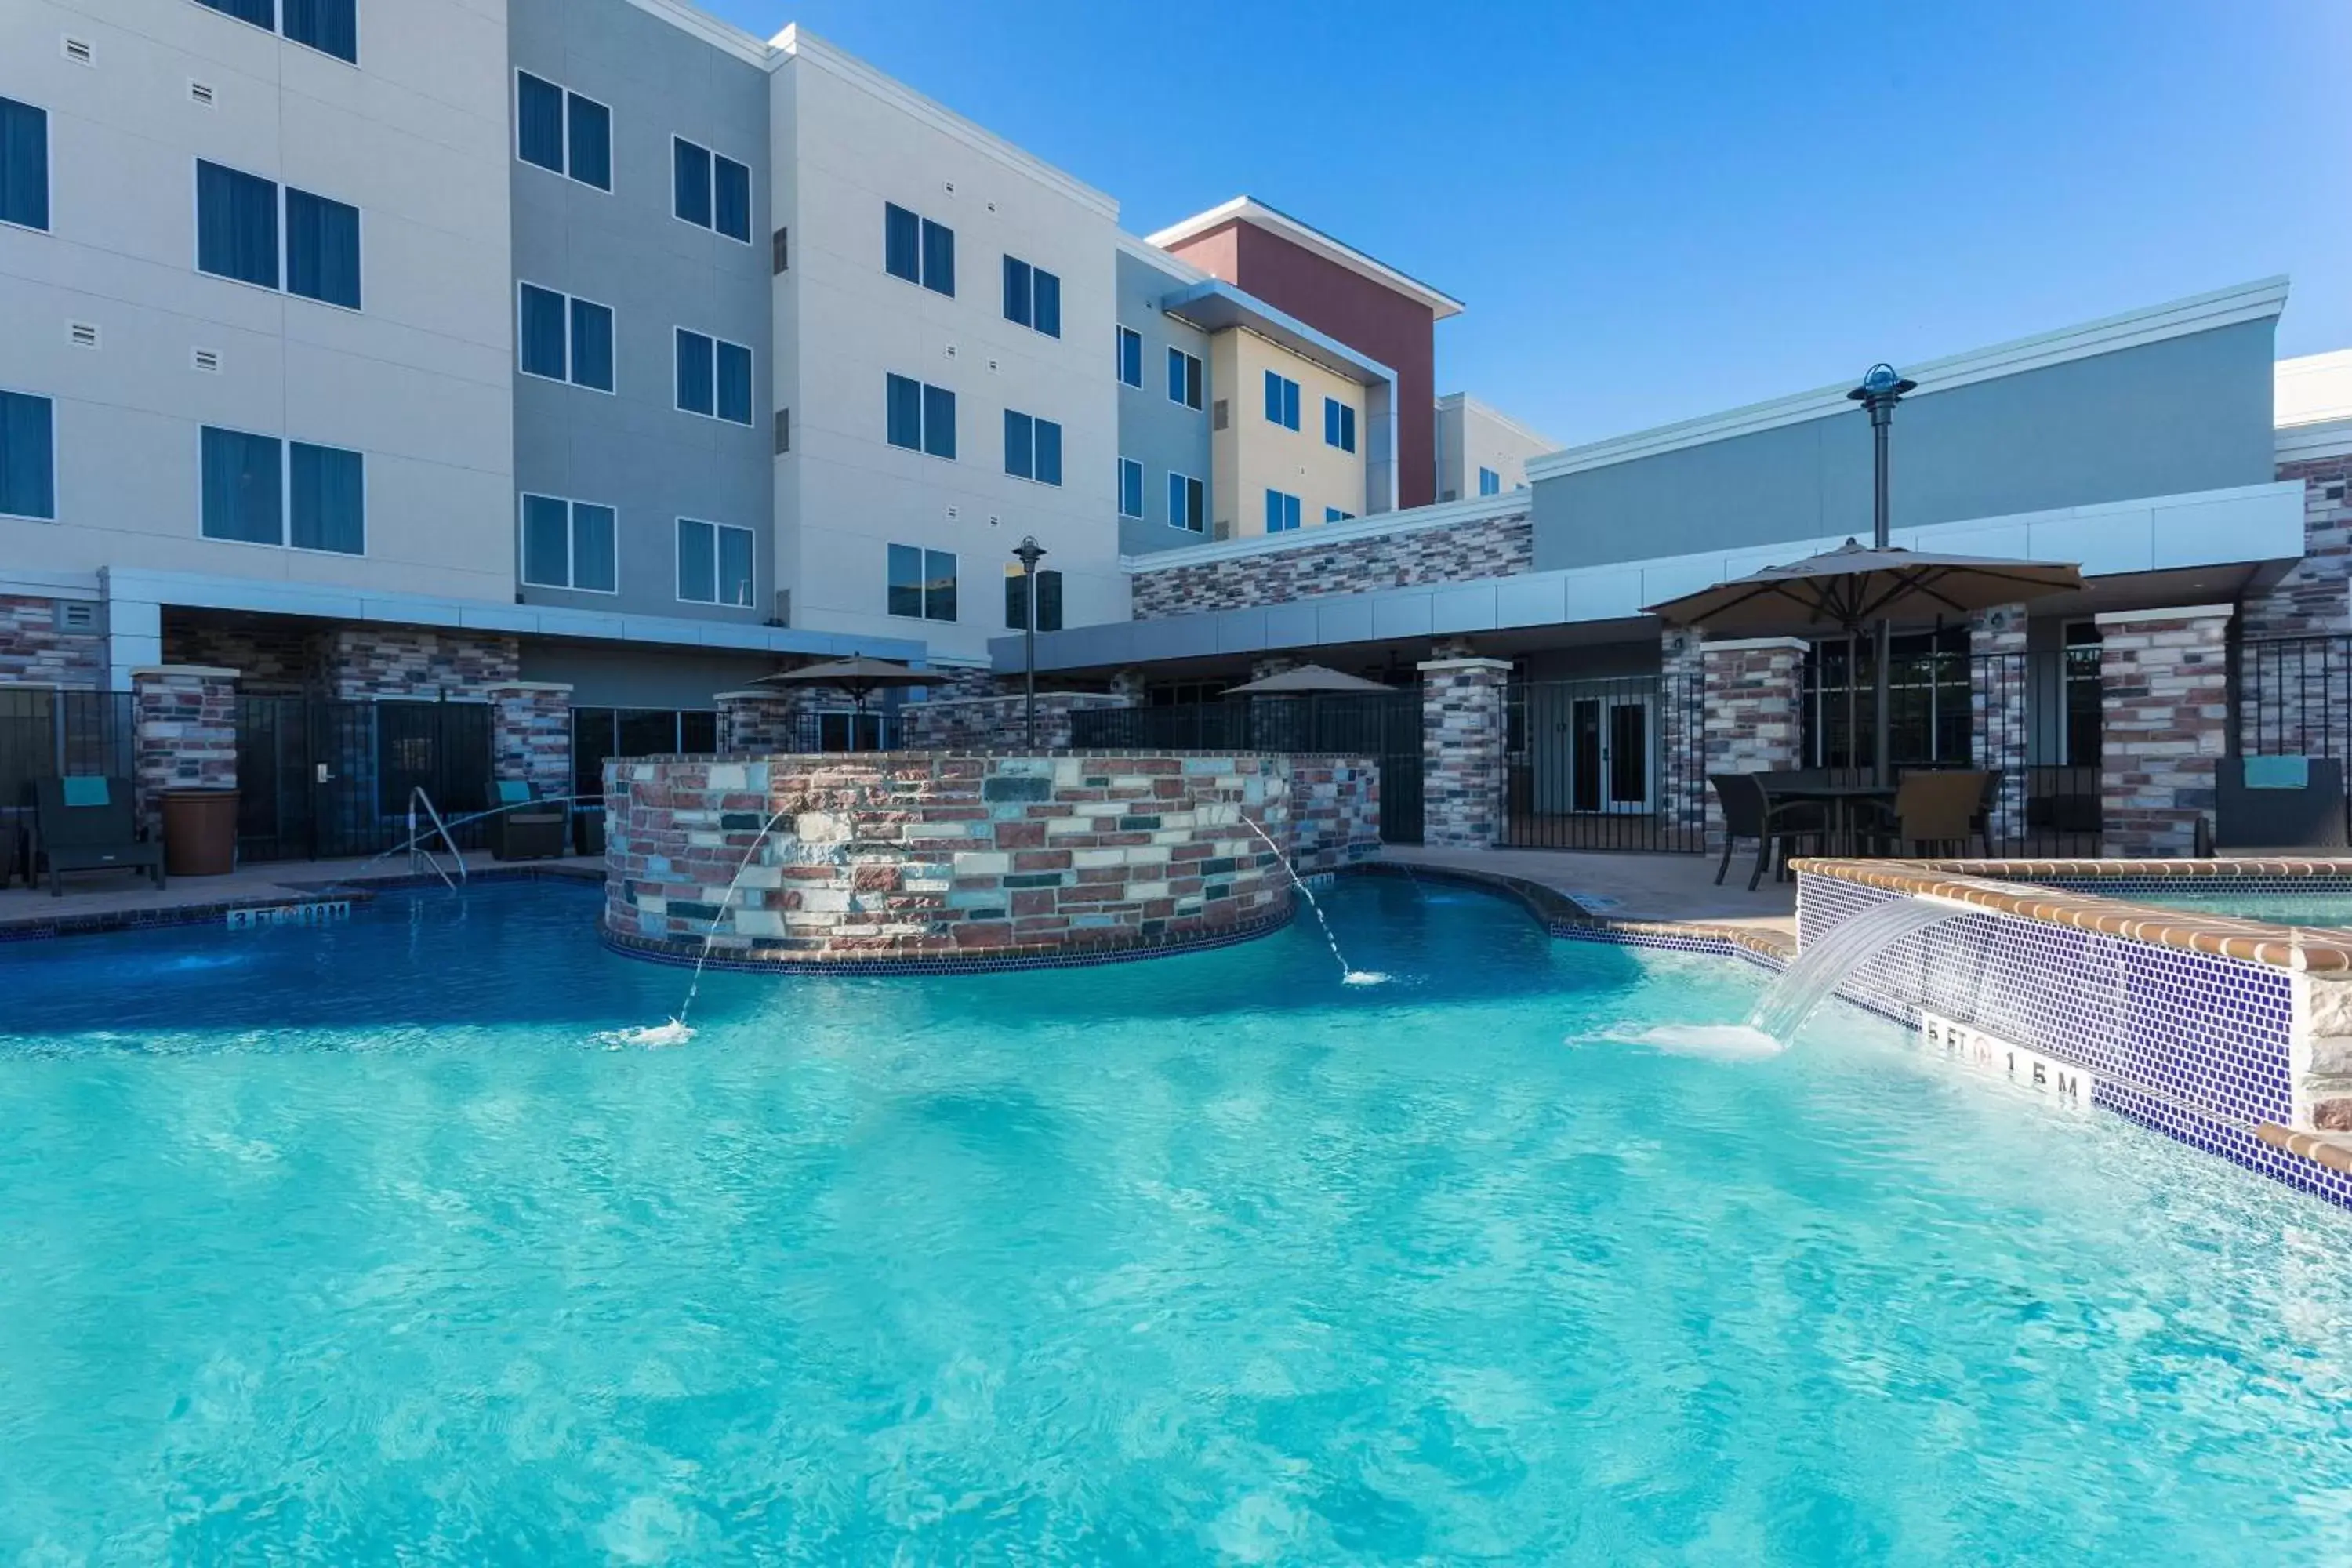 Swimming pool, Property Building in Residence Inn by Marriott Houston West/Beltway 8 at Clay Road